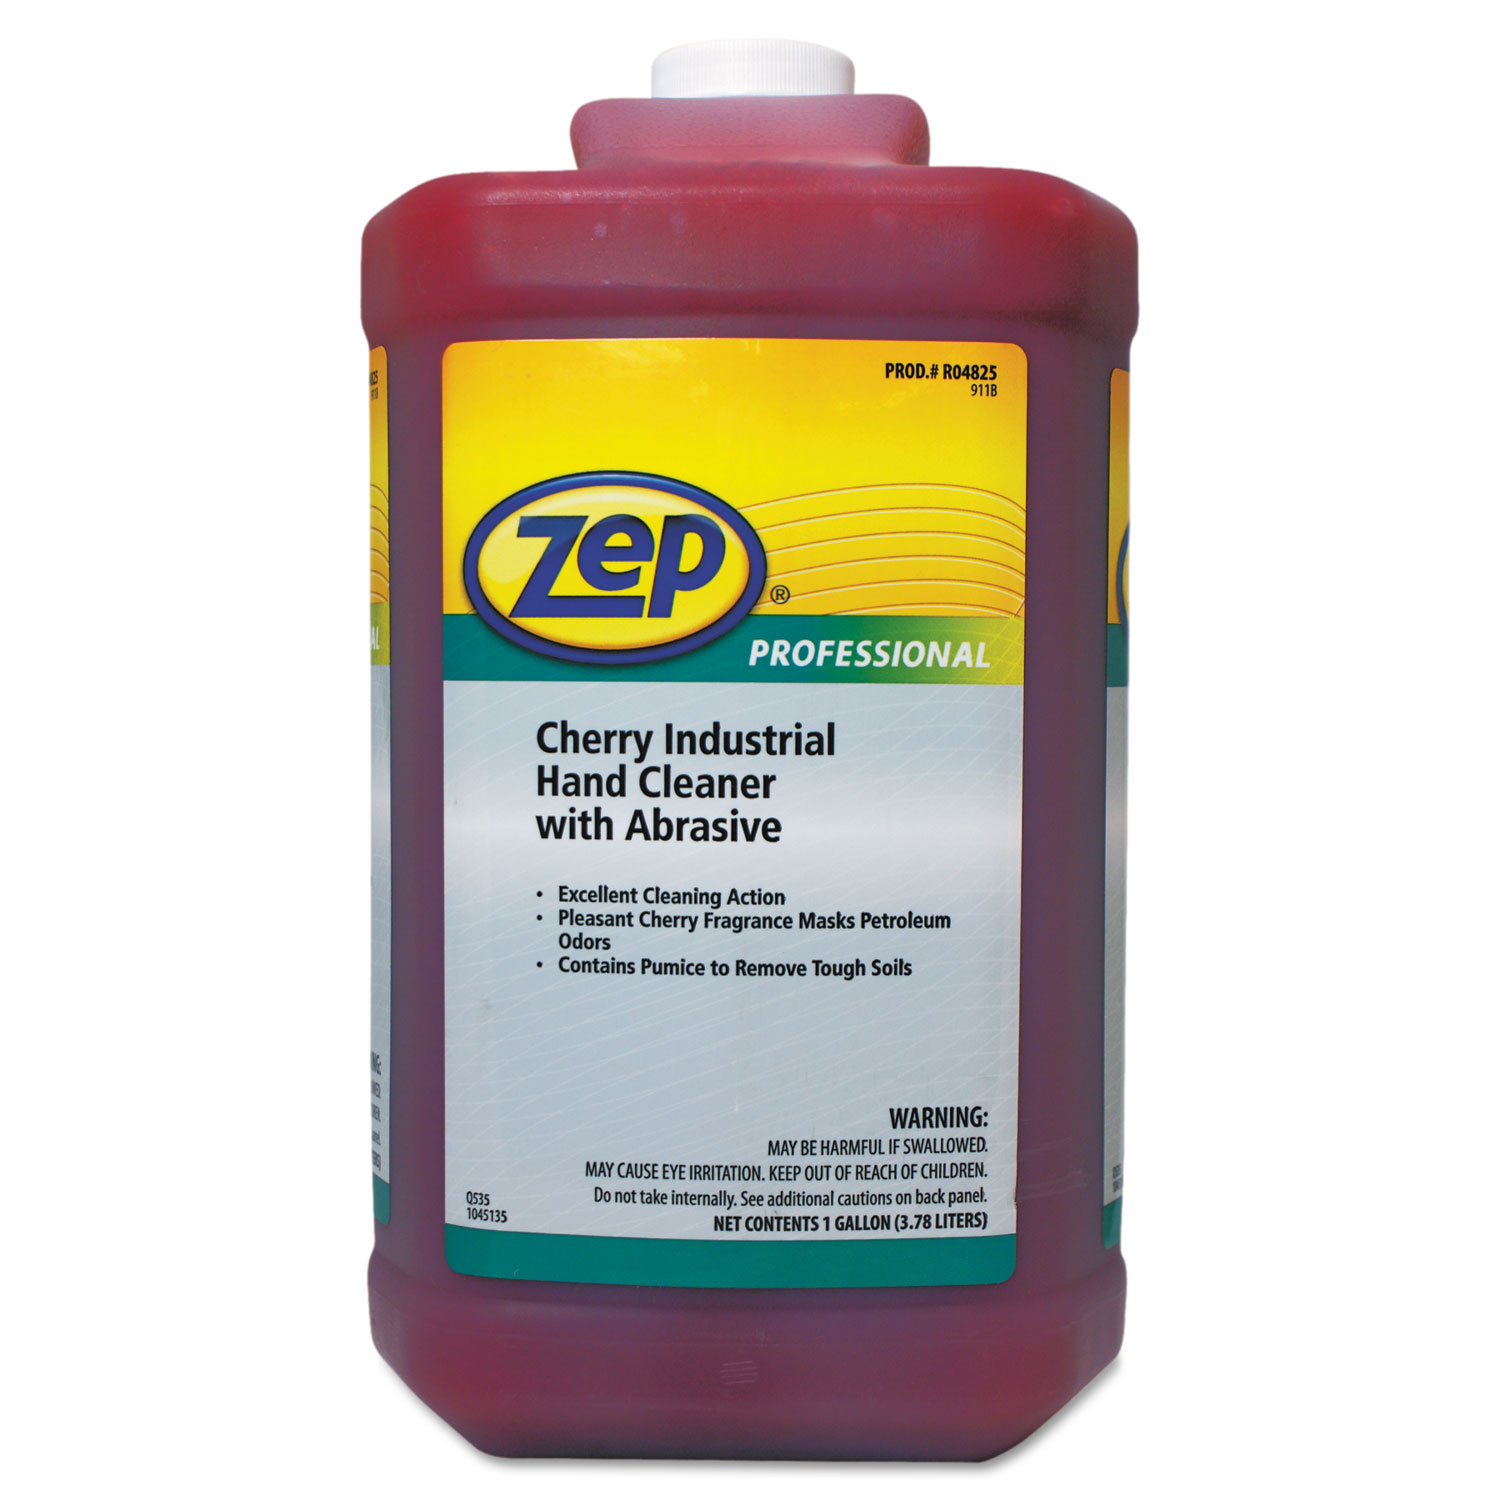 Cherry Industrial Hand Cleaner with Abrasive, Cherry, 1gal Bottle